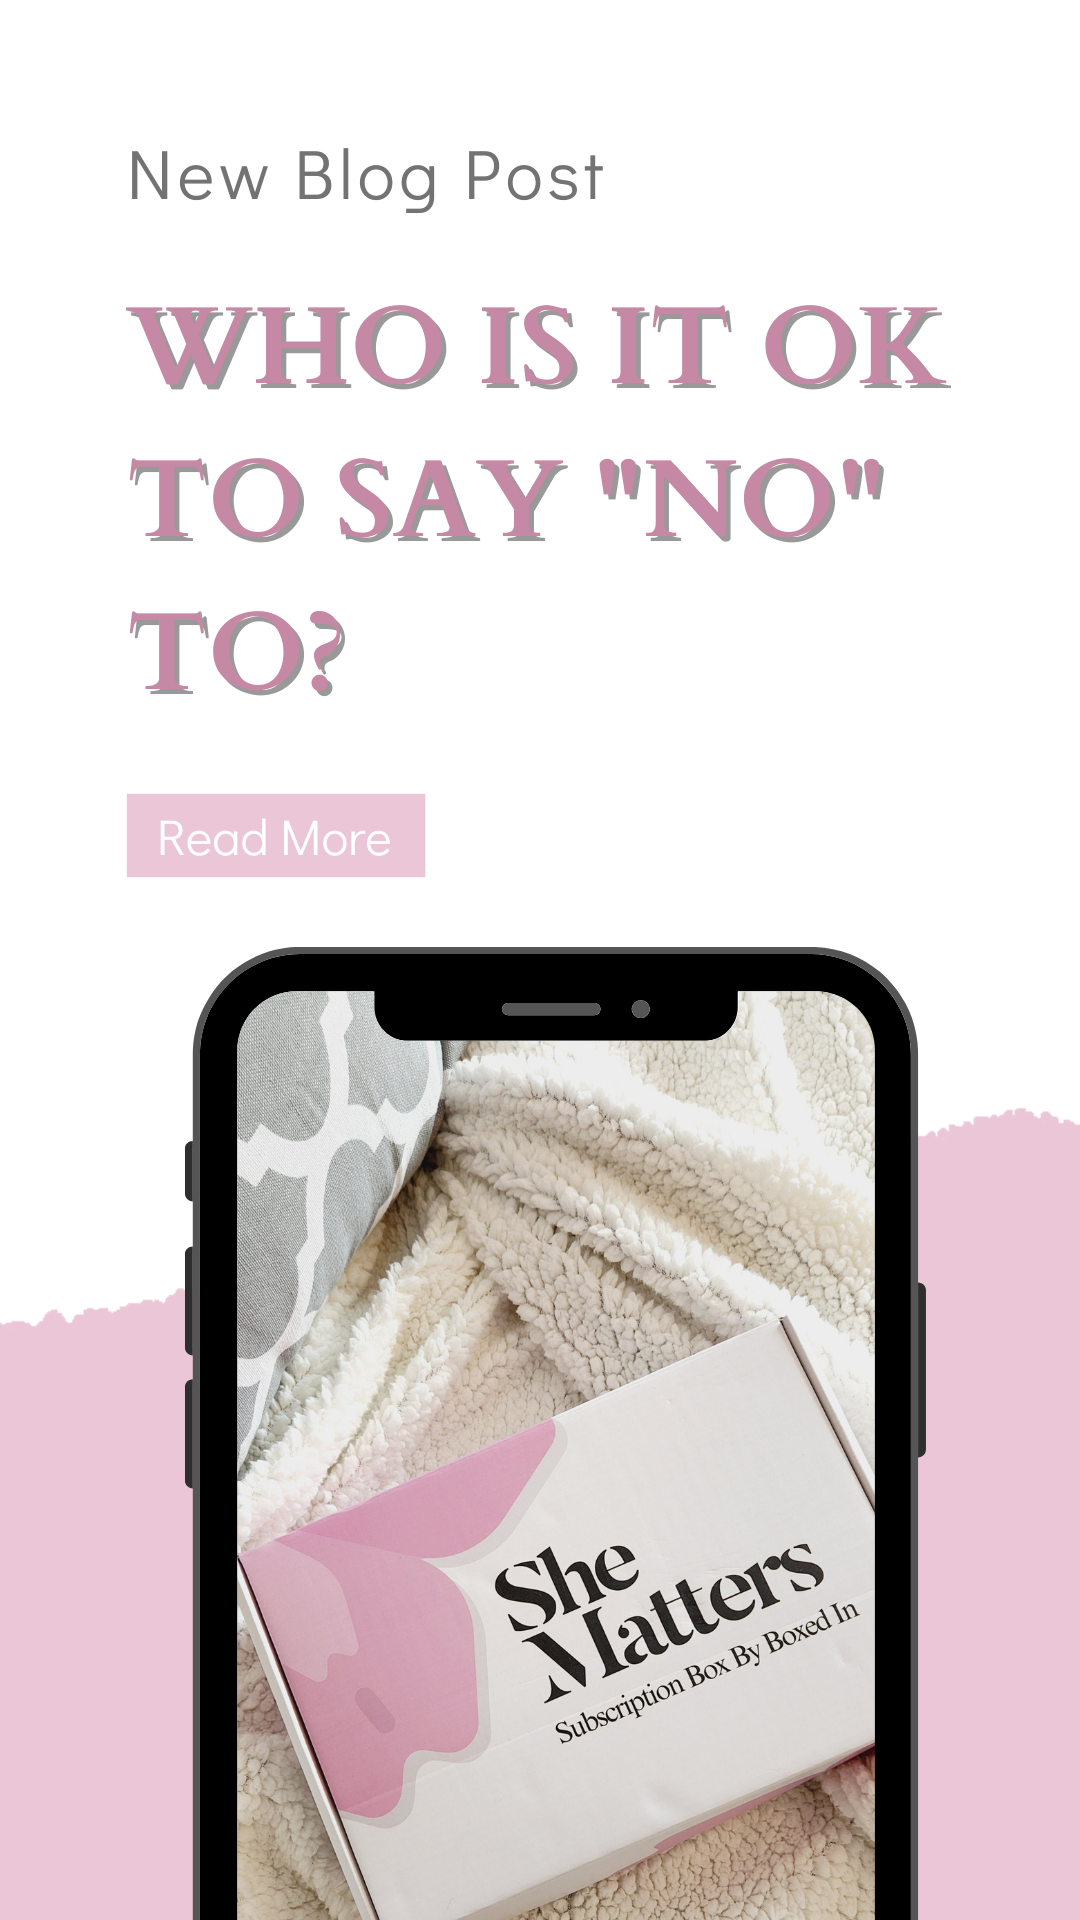 Who is it ok to say "No" to?